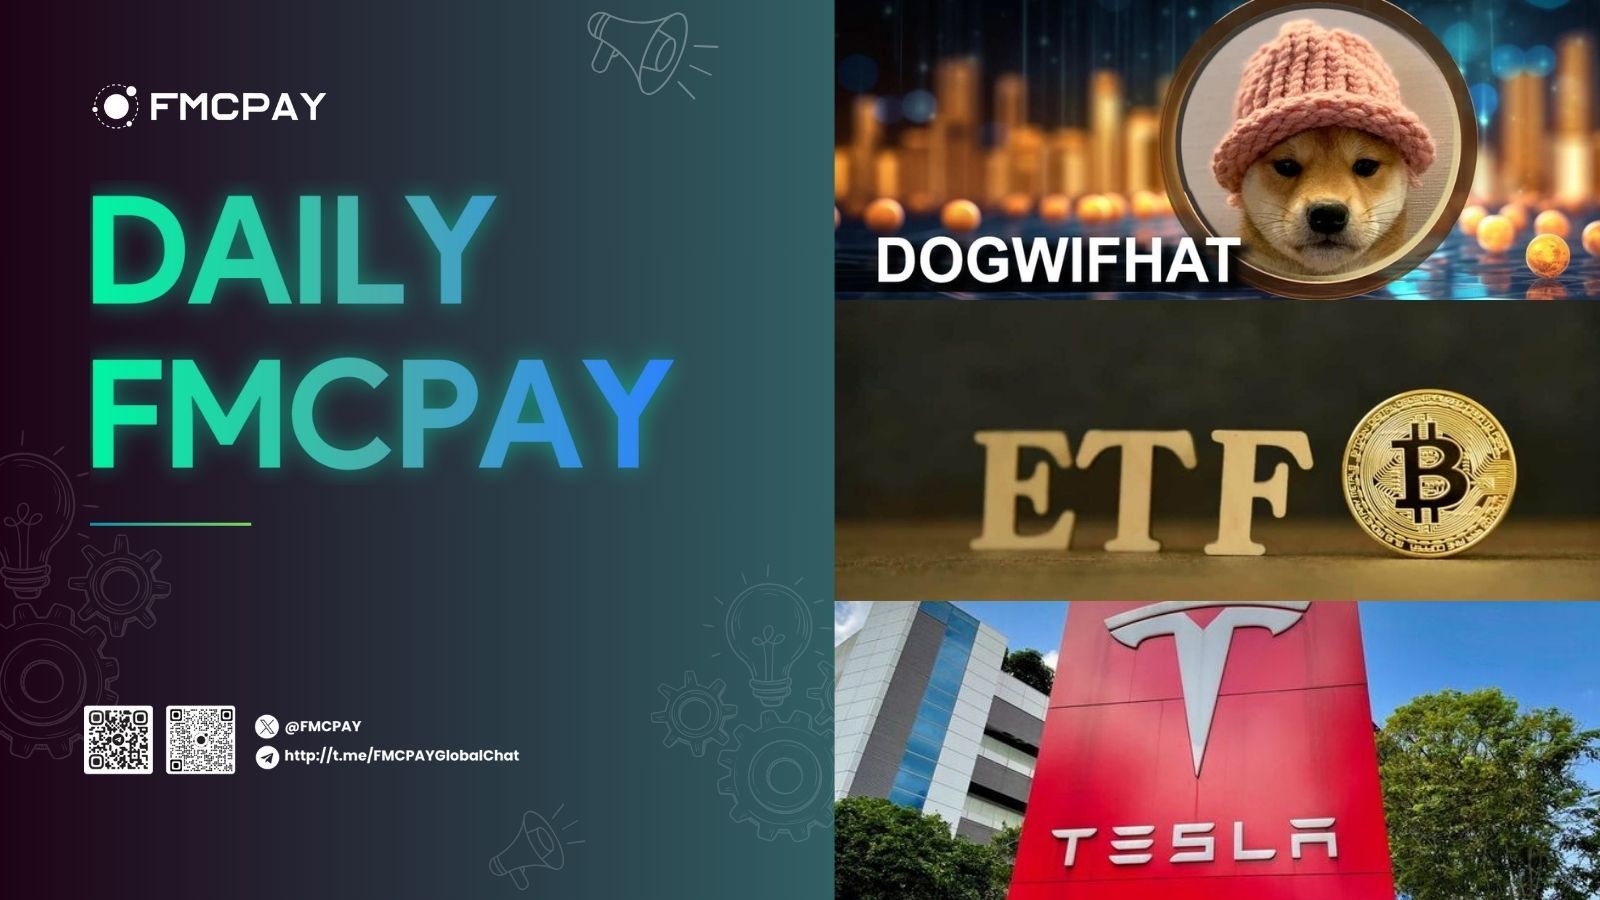 fmcpay the price of dogwifhat wif has increased by over 20